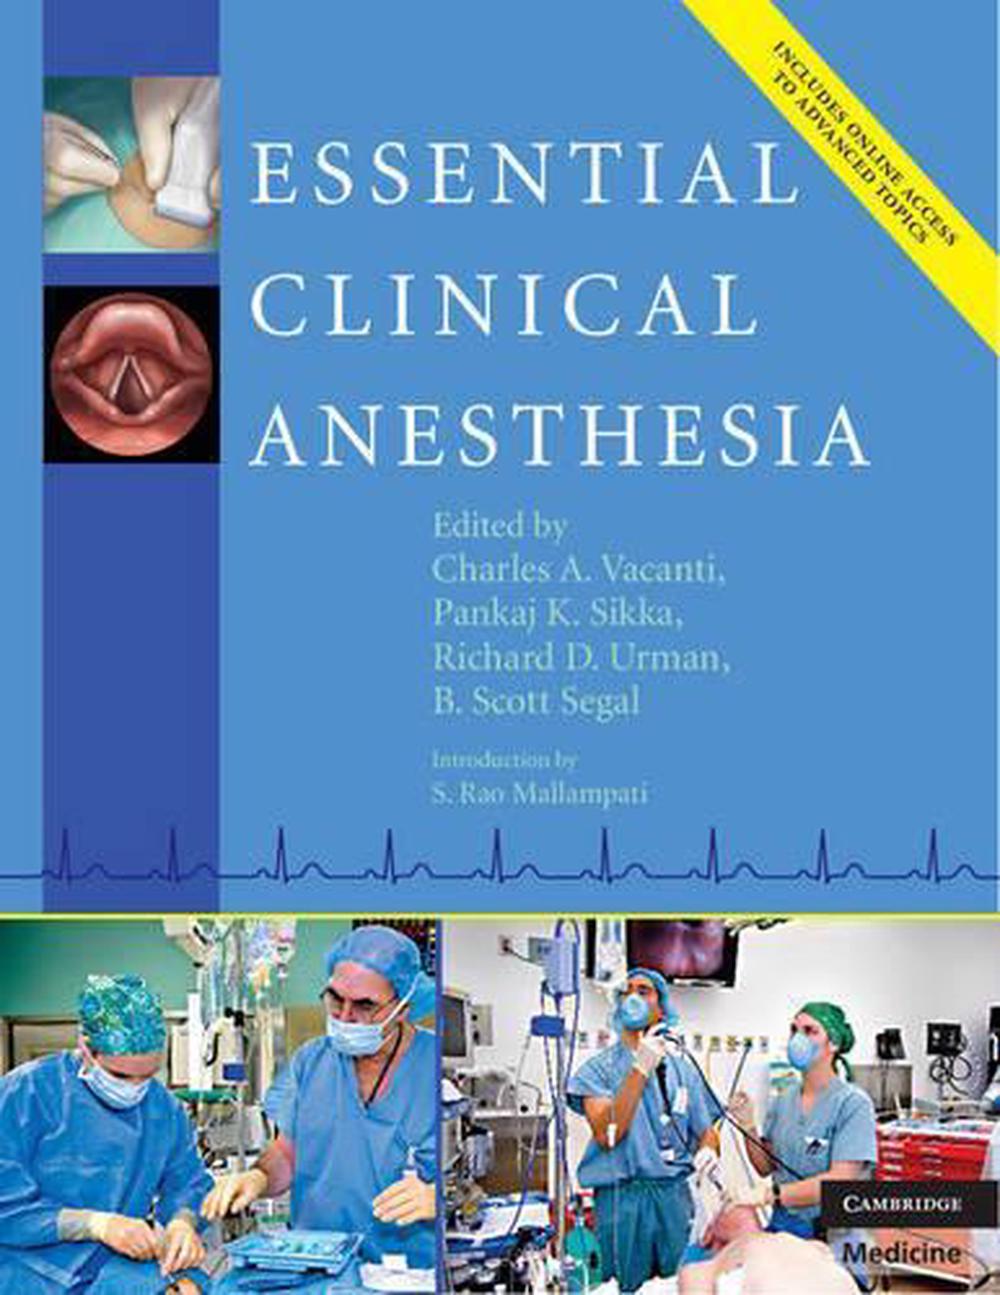 research topics in anesthesia